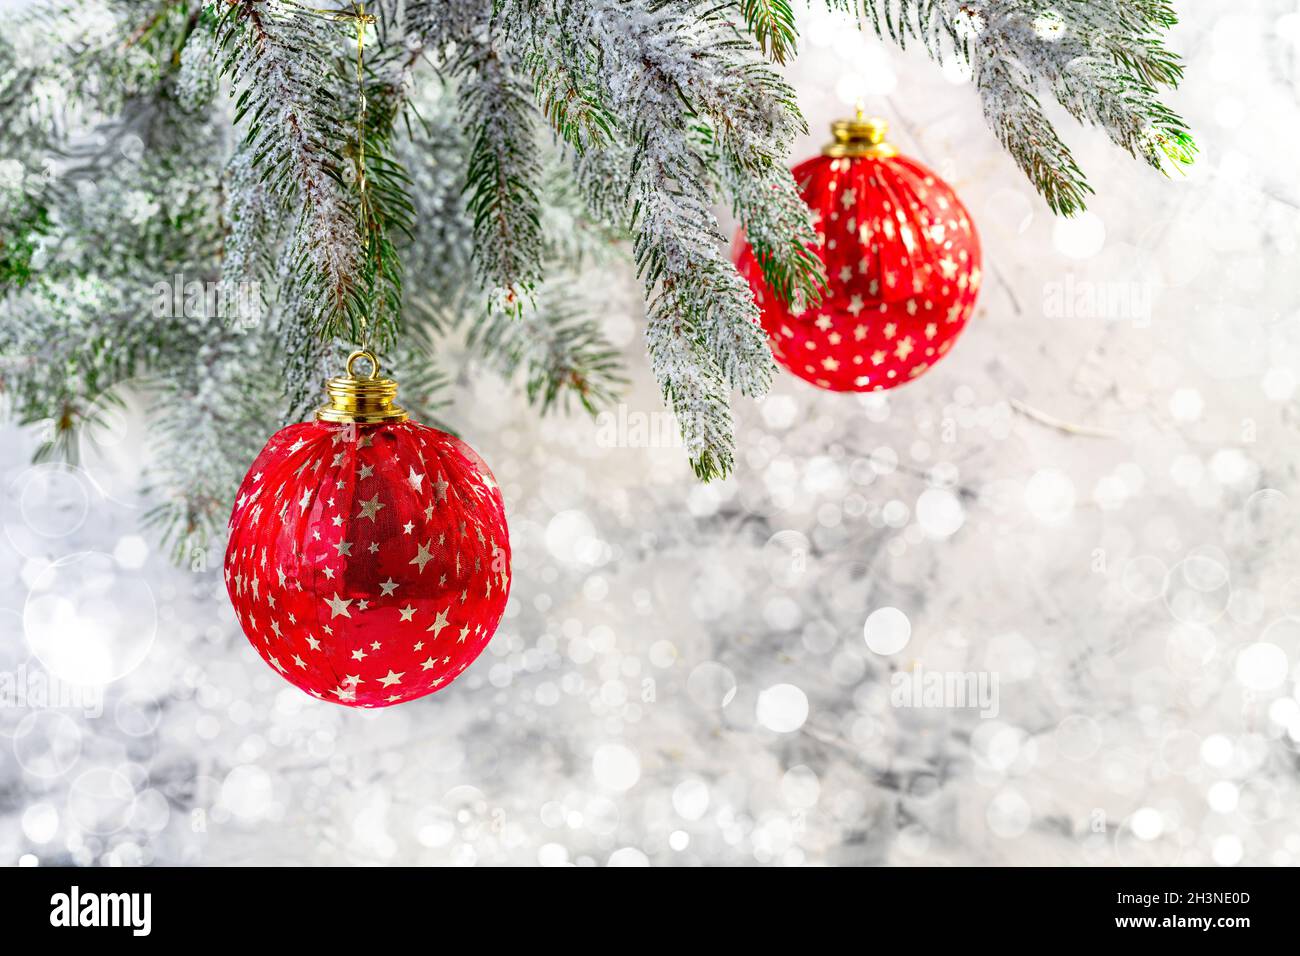 Christmas card with red balls on a spruce branch. Stock Photo